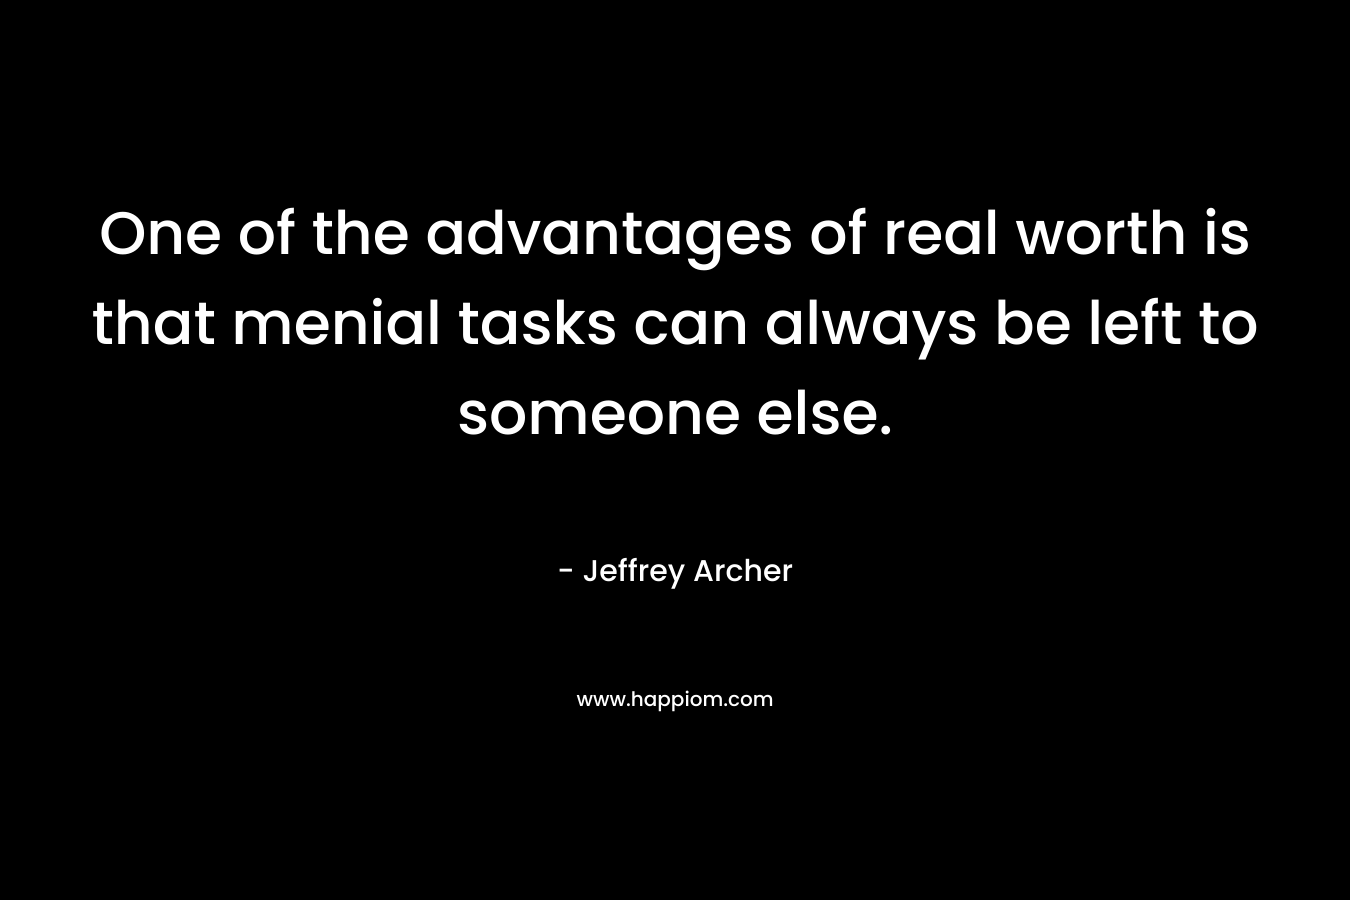 One of the advantages of real worth is that menial tasks can always be left to someone else.